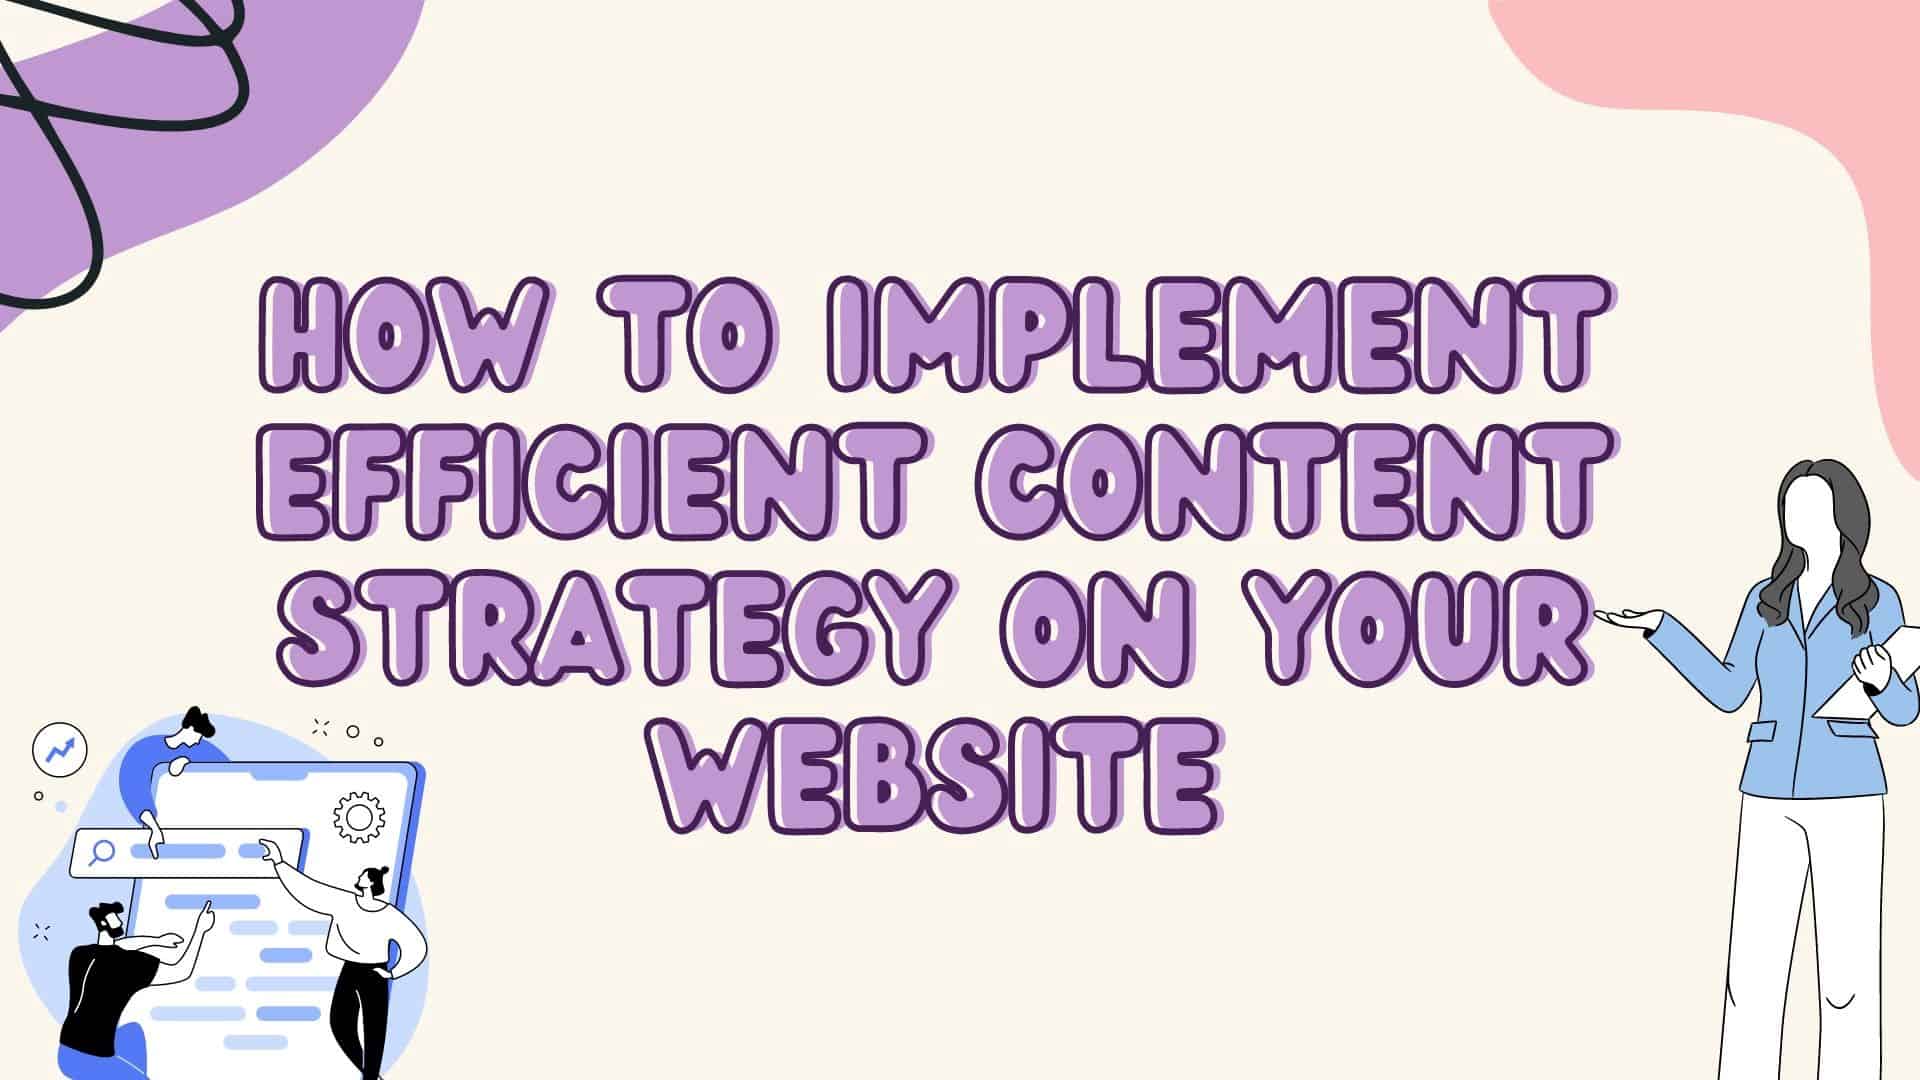 How to Implement Efficient Content Strategy on Your Website